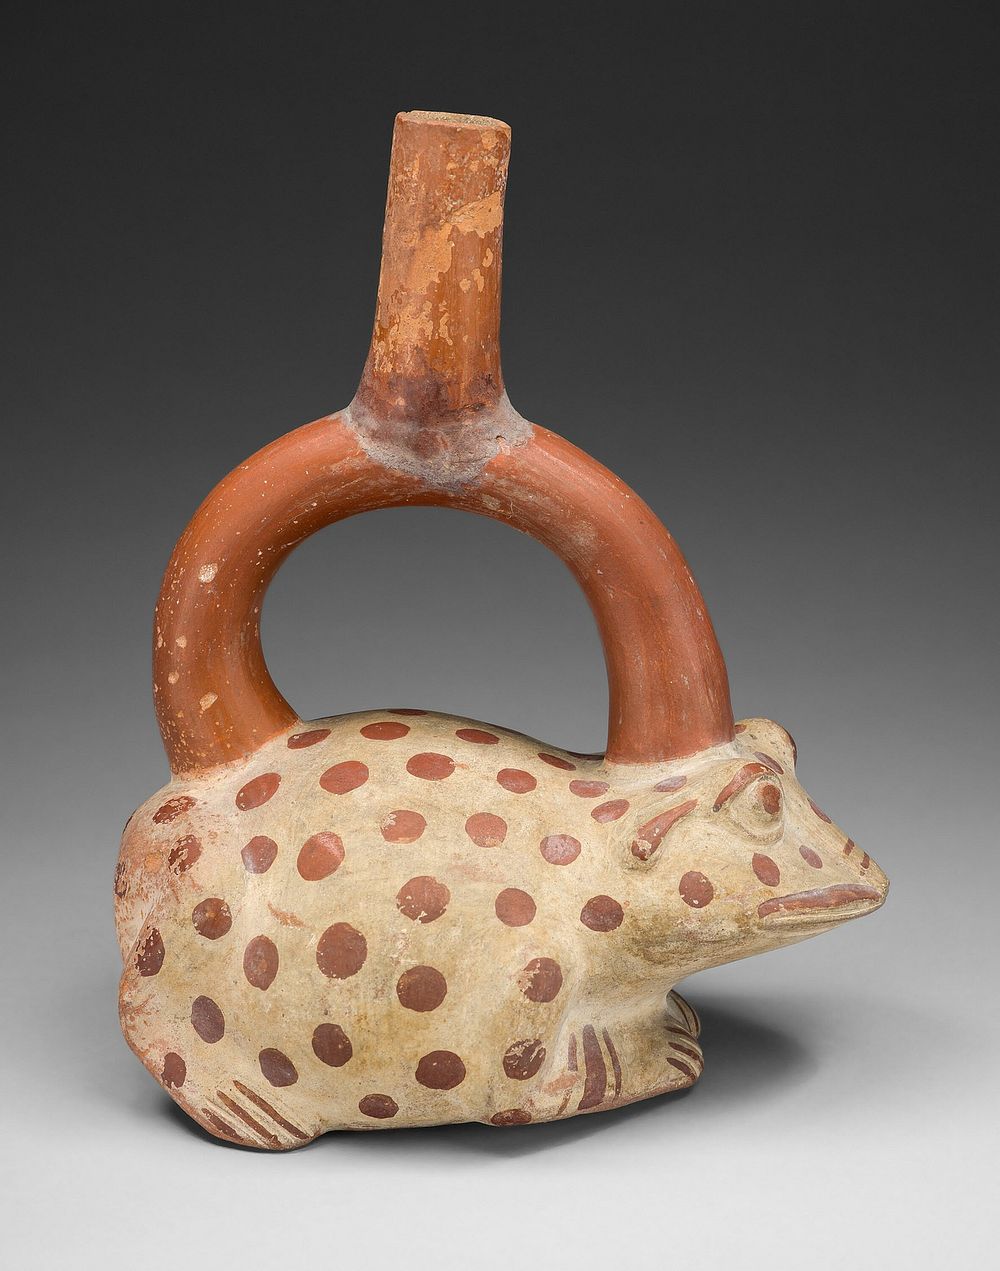 Stirrup Spout Vessel in Form of a Frog by Moche